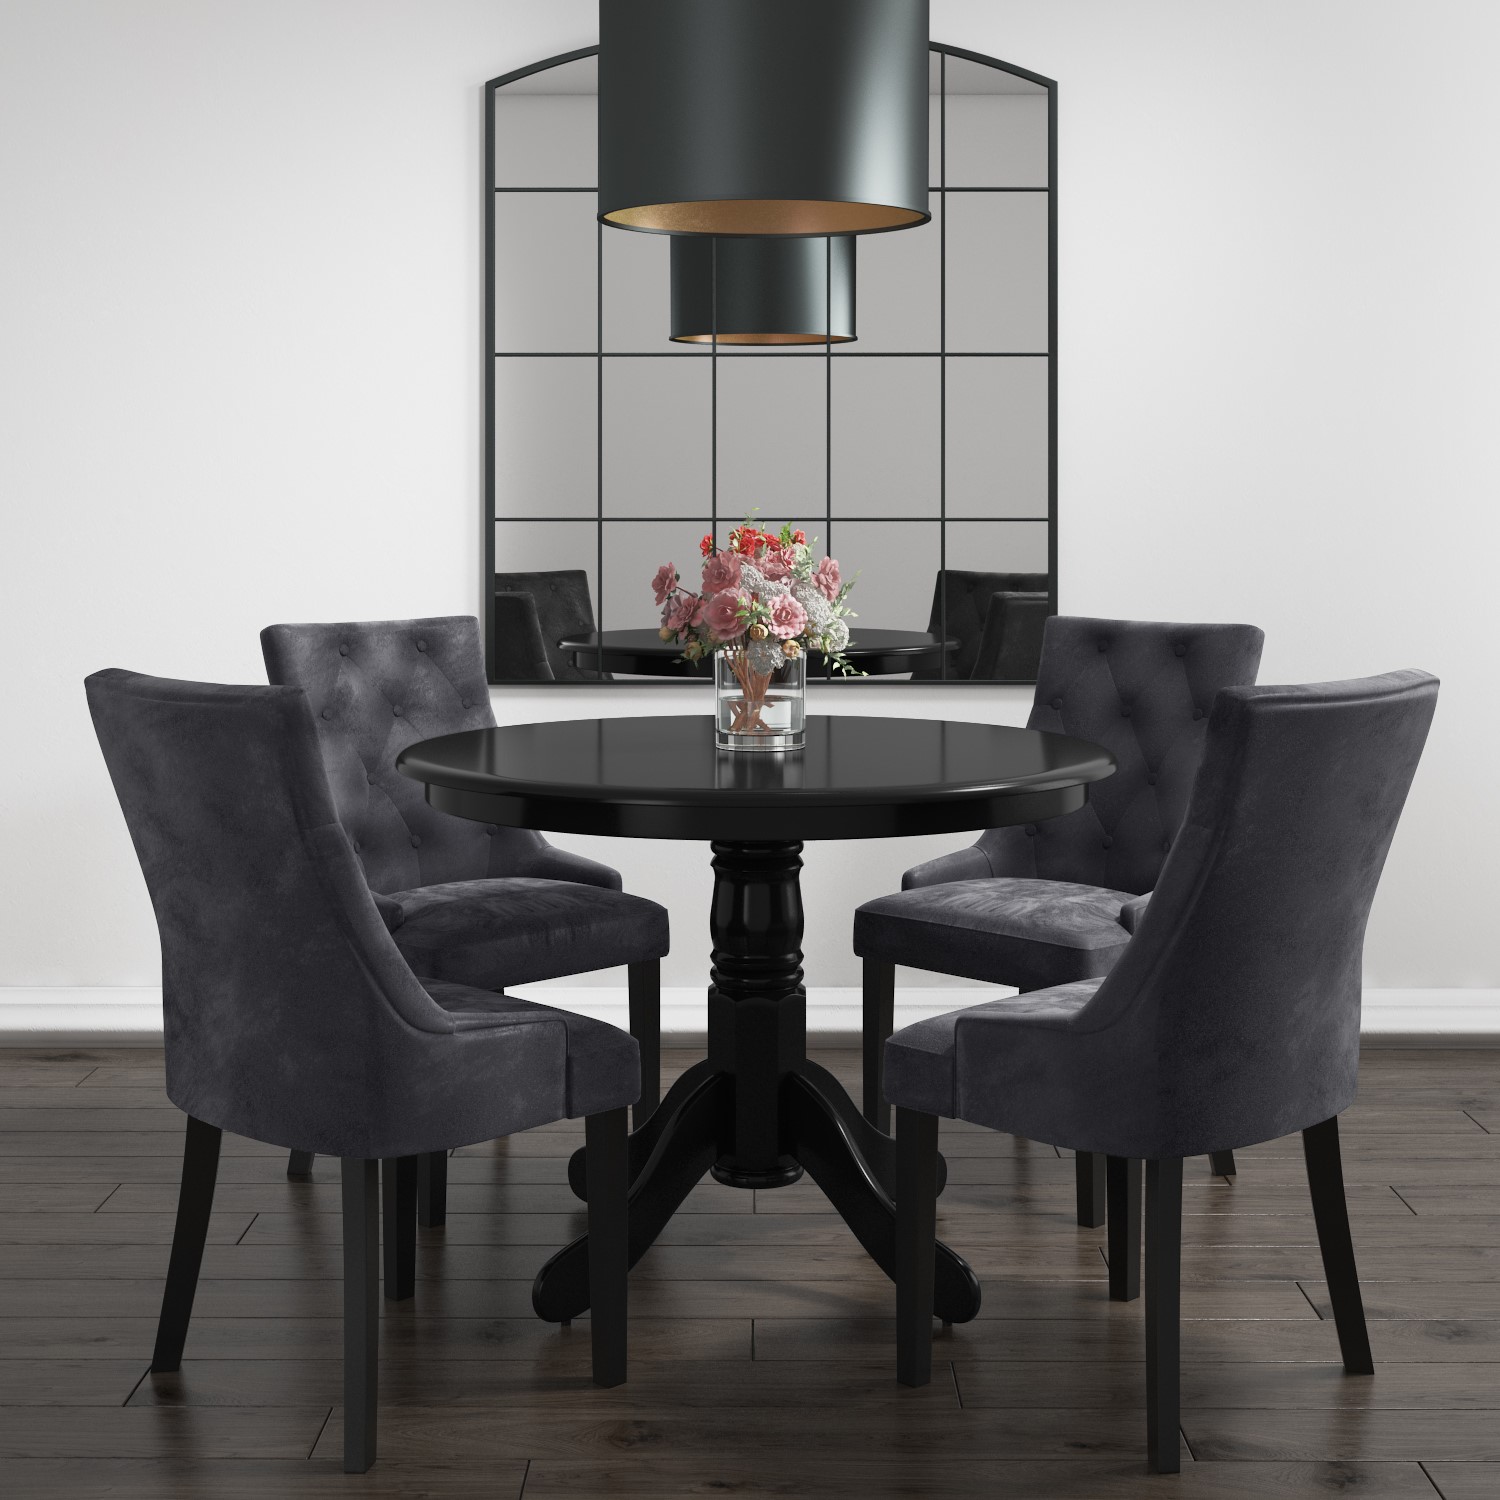 Small Round Dining Table In Black With, Round Dining Table And Chairs For 4 Uk